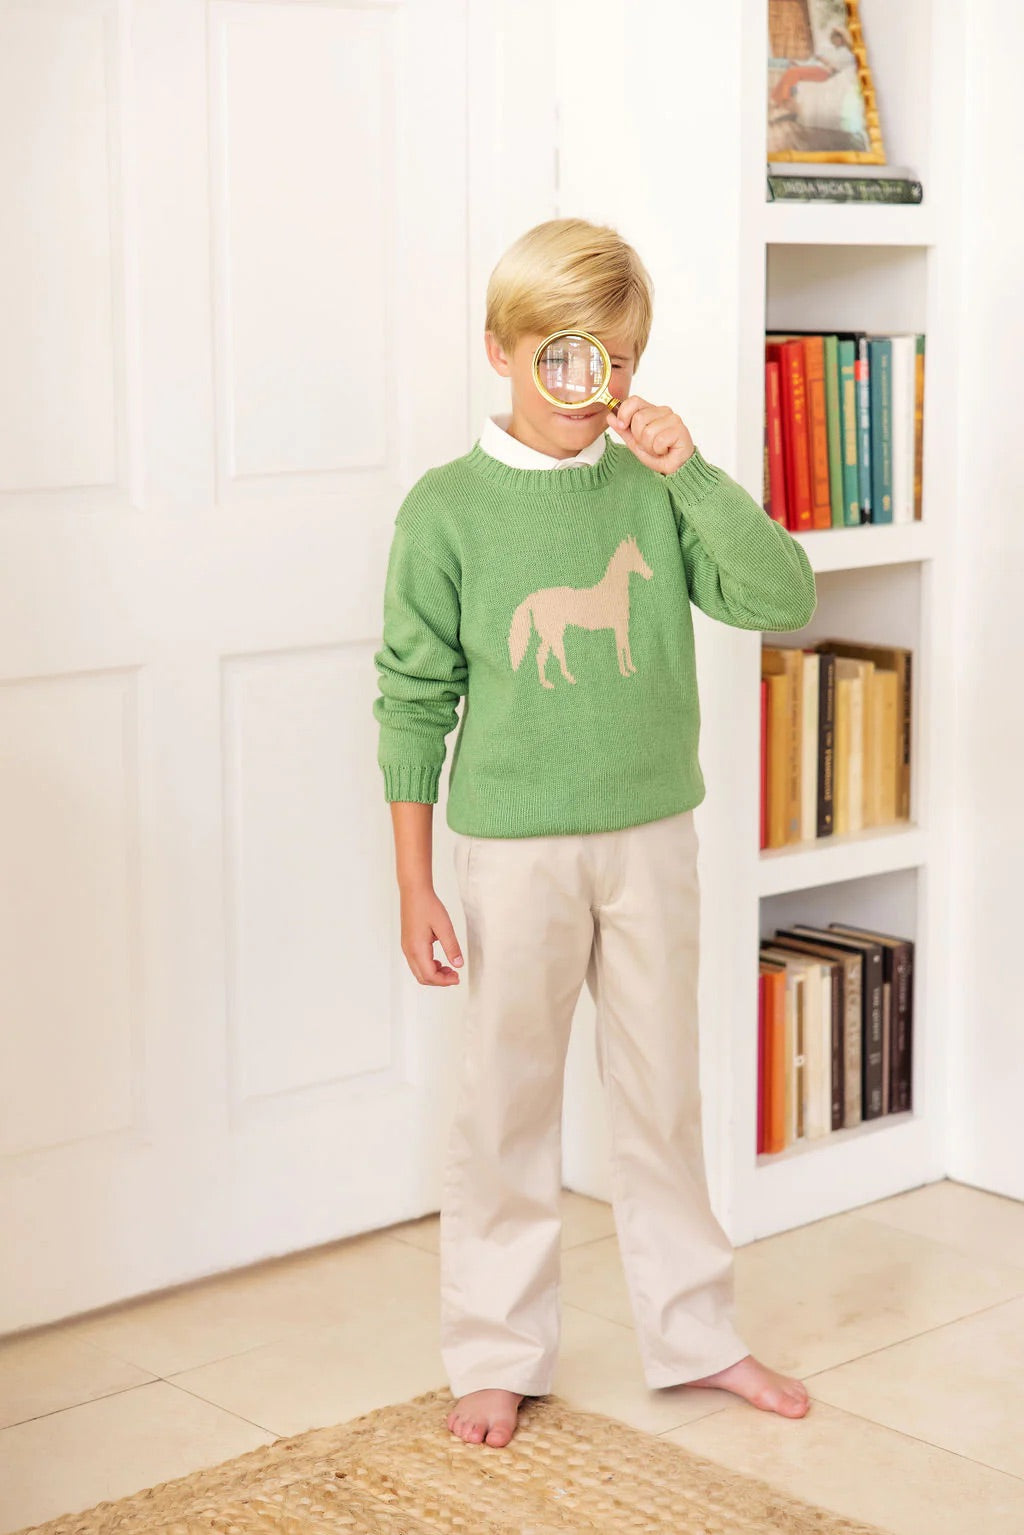 Isaac's Intarsia Sweater in Grenada Green with Horse